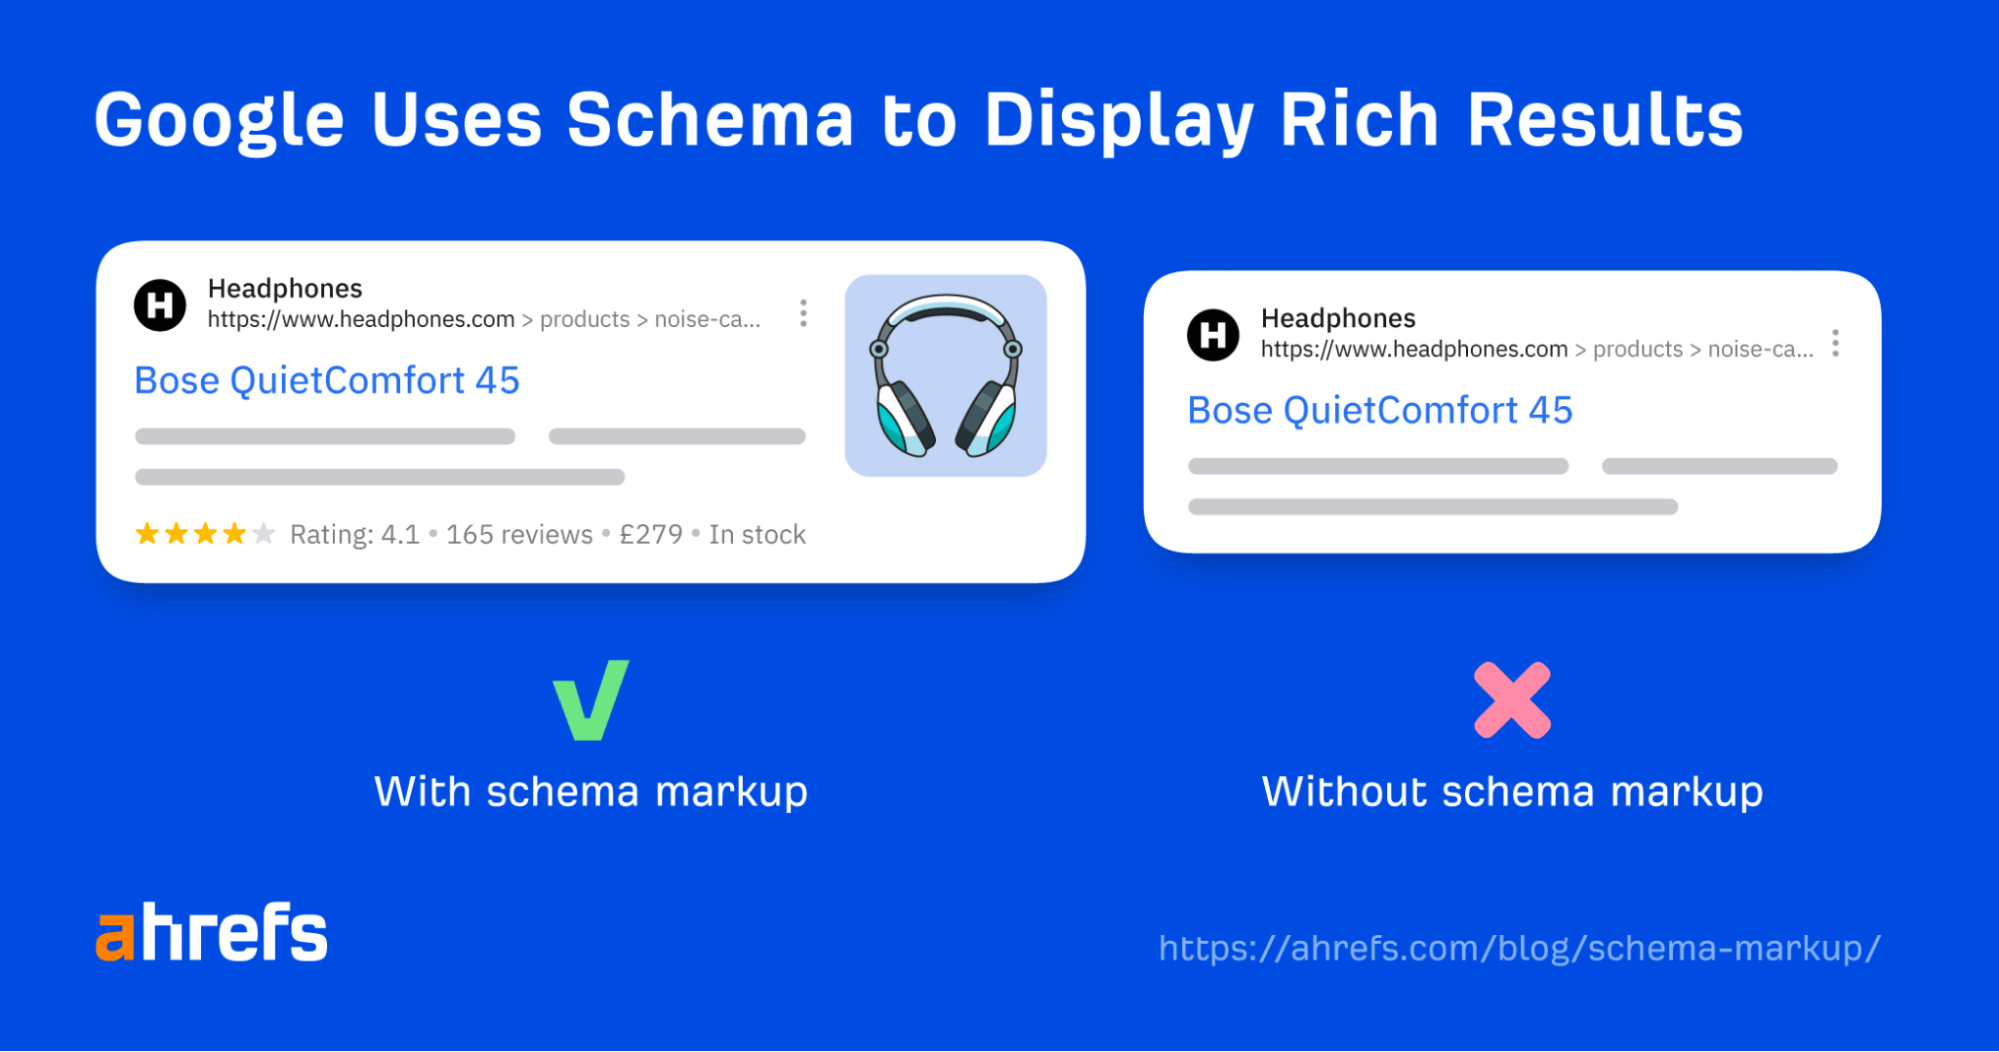 Examples of Google SERP result with and without schema markup, respectively